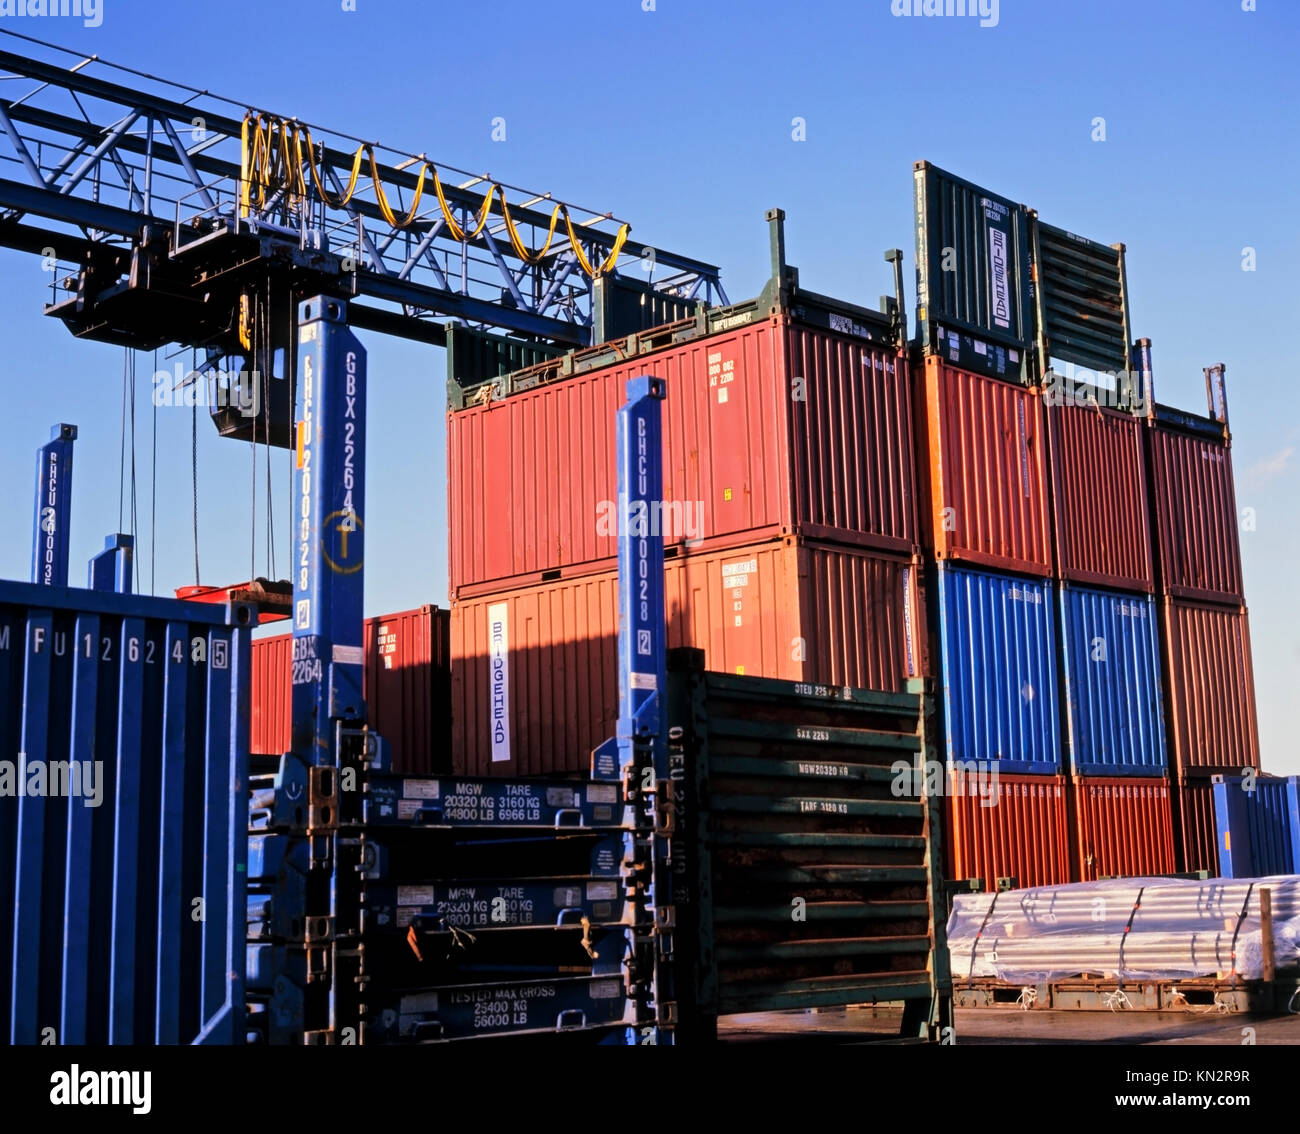 Shipping containers stacked at a container terminal and docks Stock Photo